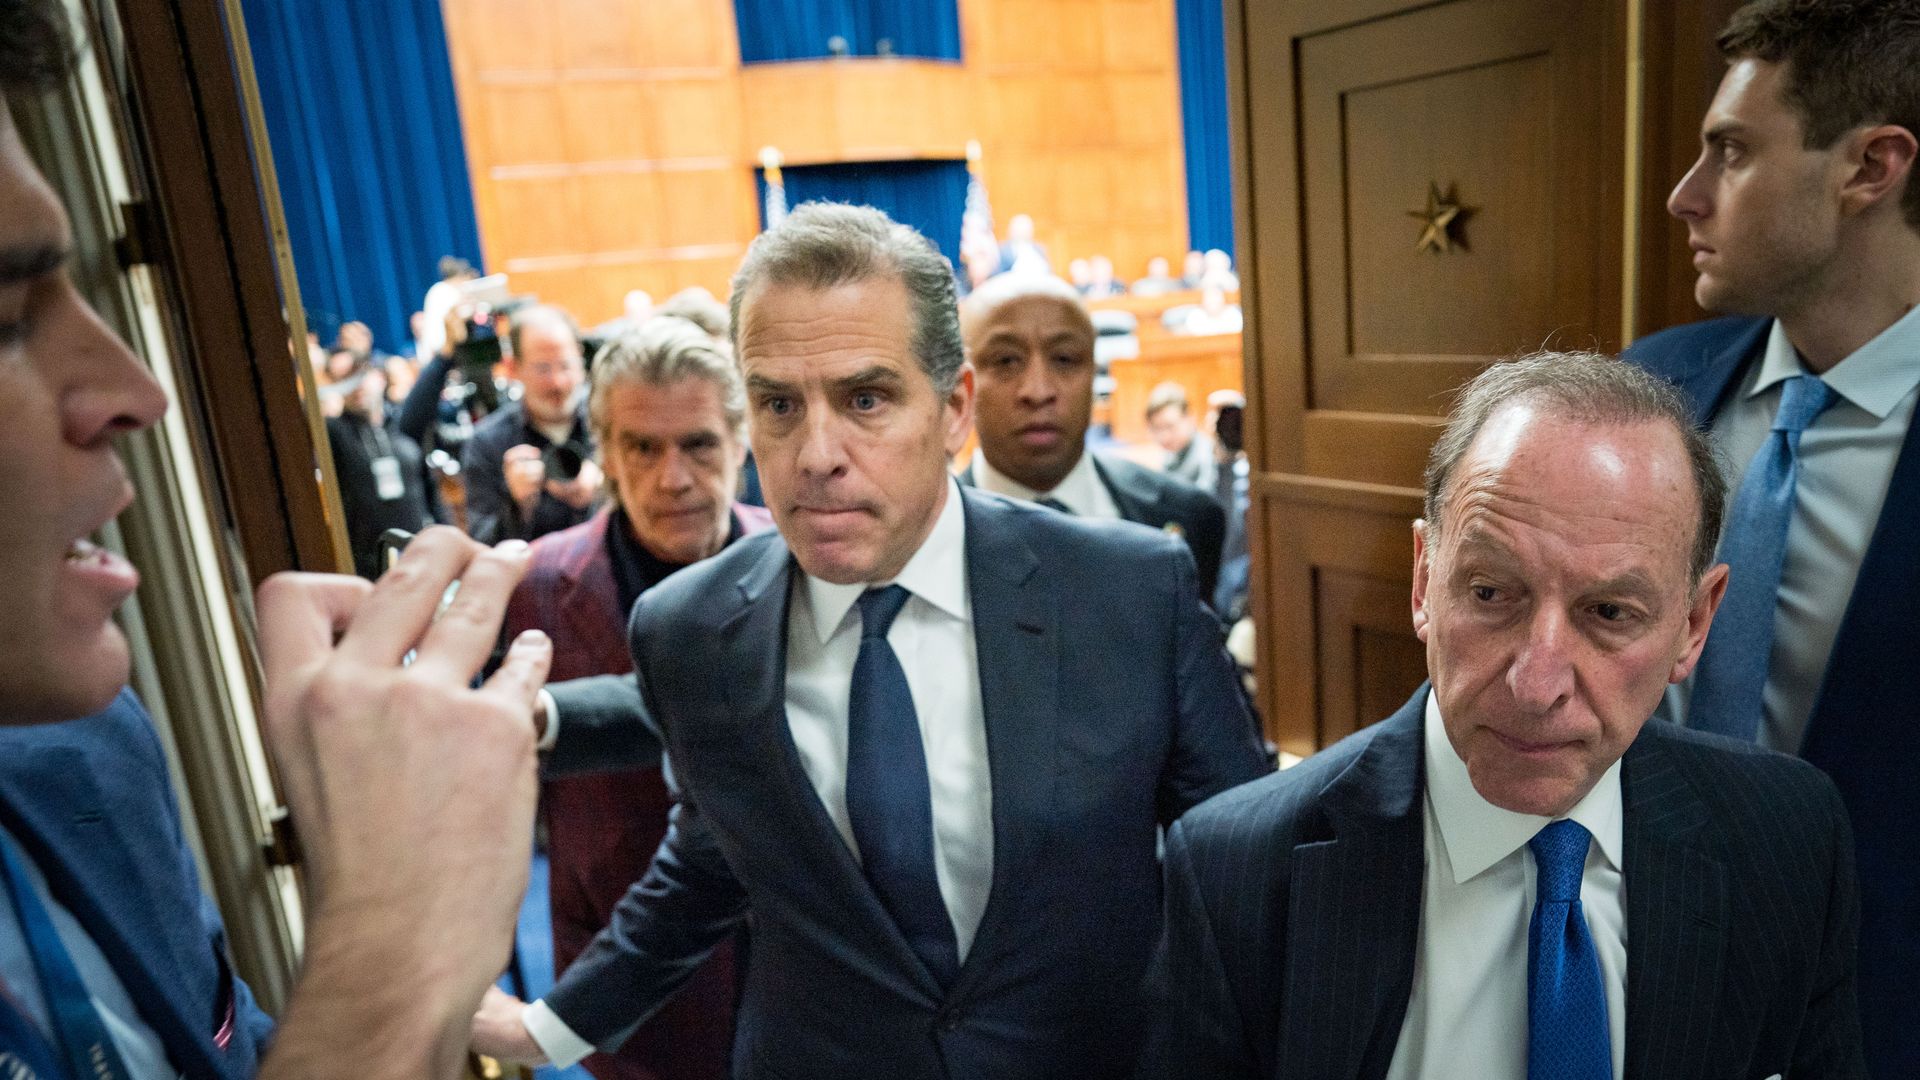 Hunter Biden, center, and attorney Abbe Lowell leave a House committee hearing